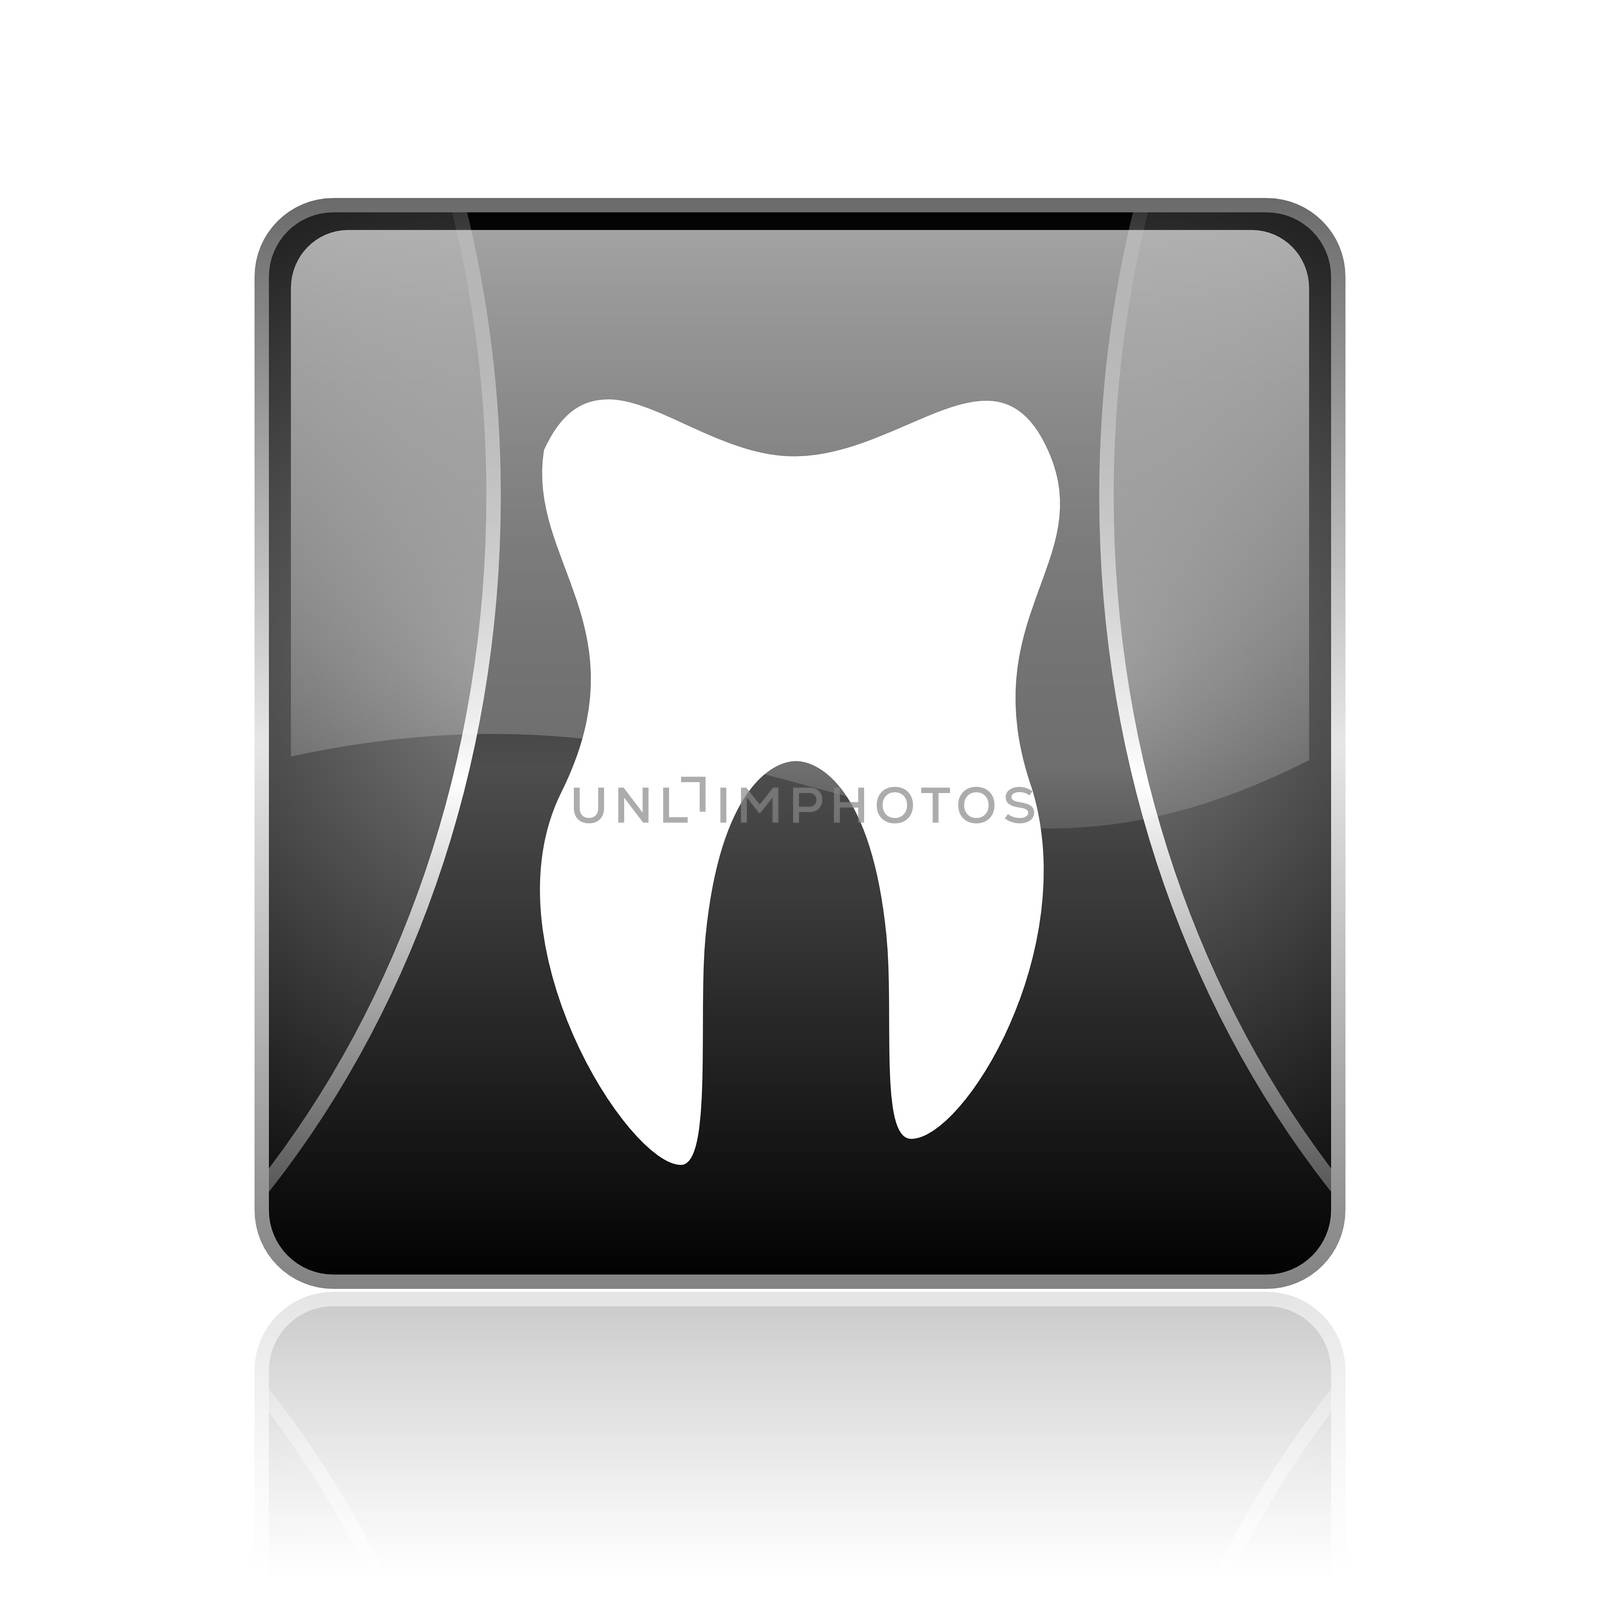 black modern square web glossy icon on white background with reflaction